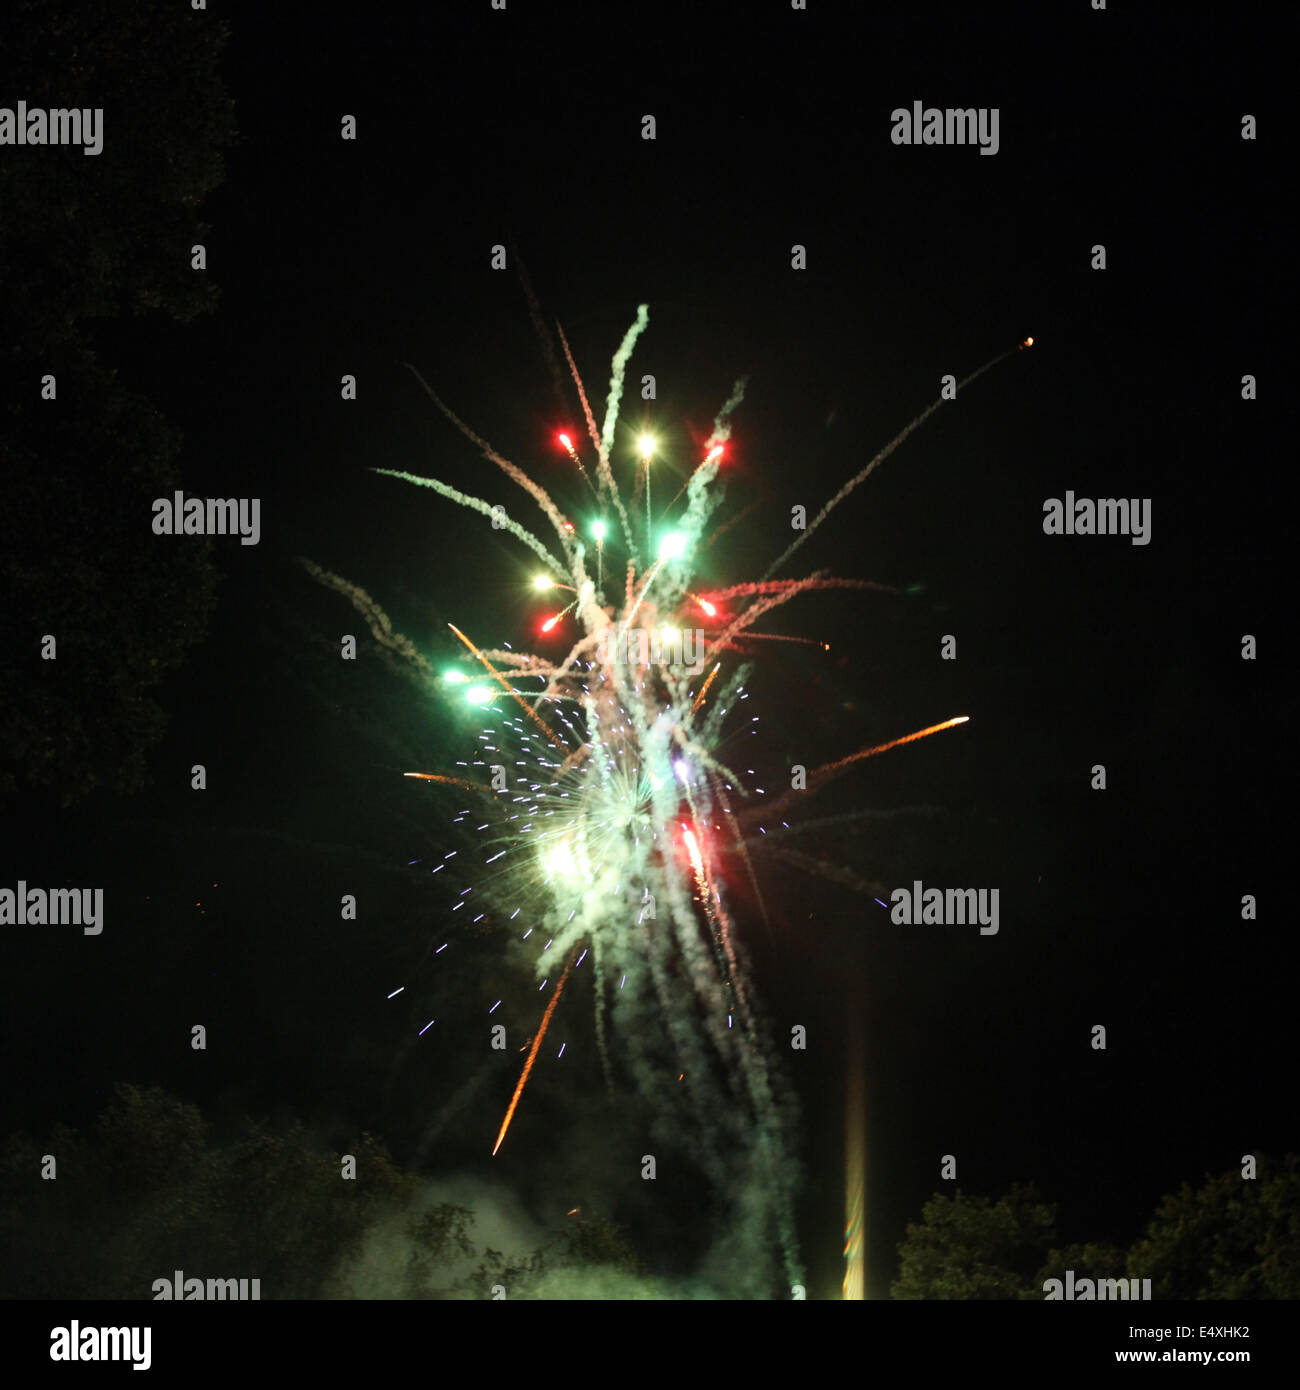 Colorful festive fireworks display Stock Photo